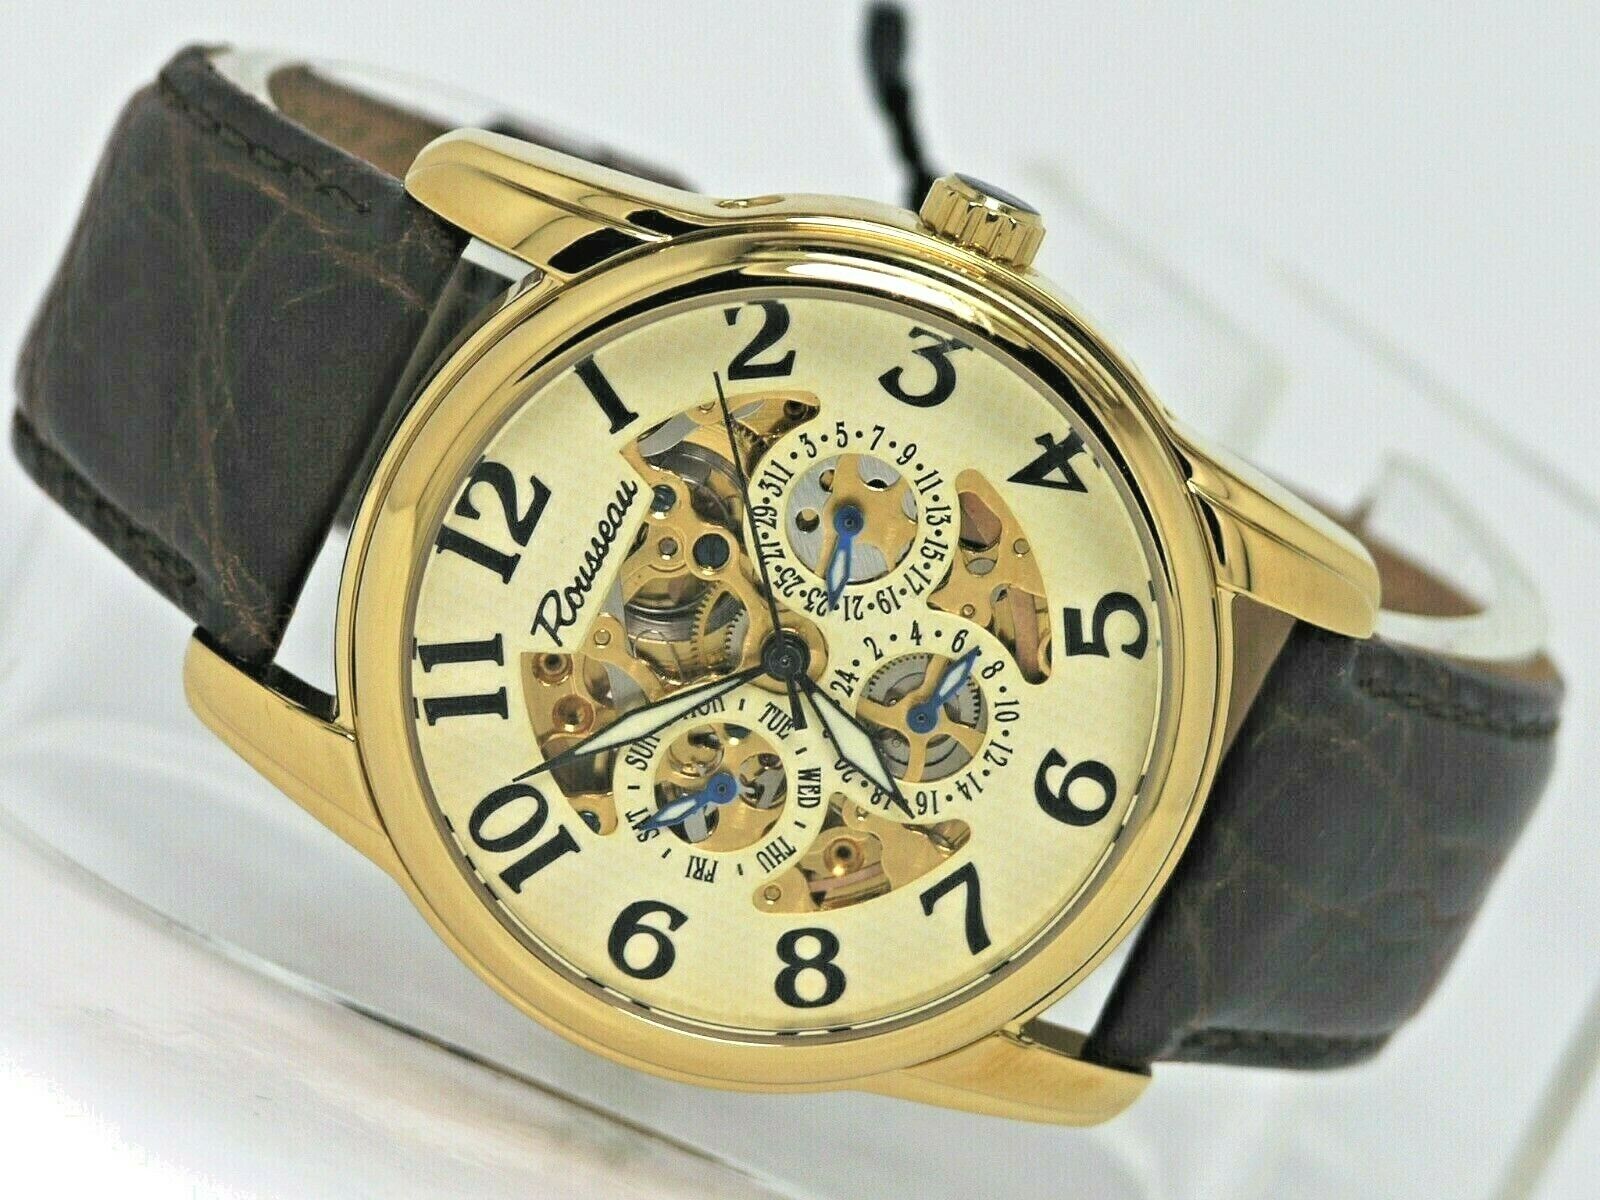 NEW ROUSSEAU PERSONNA AUTOMATIC SKELETON GOLD TONE MULTI FUNCTION WATCH